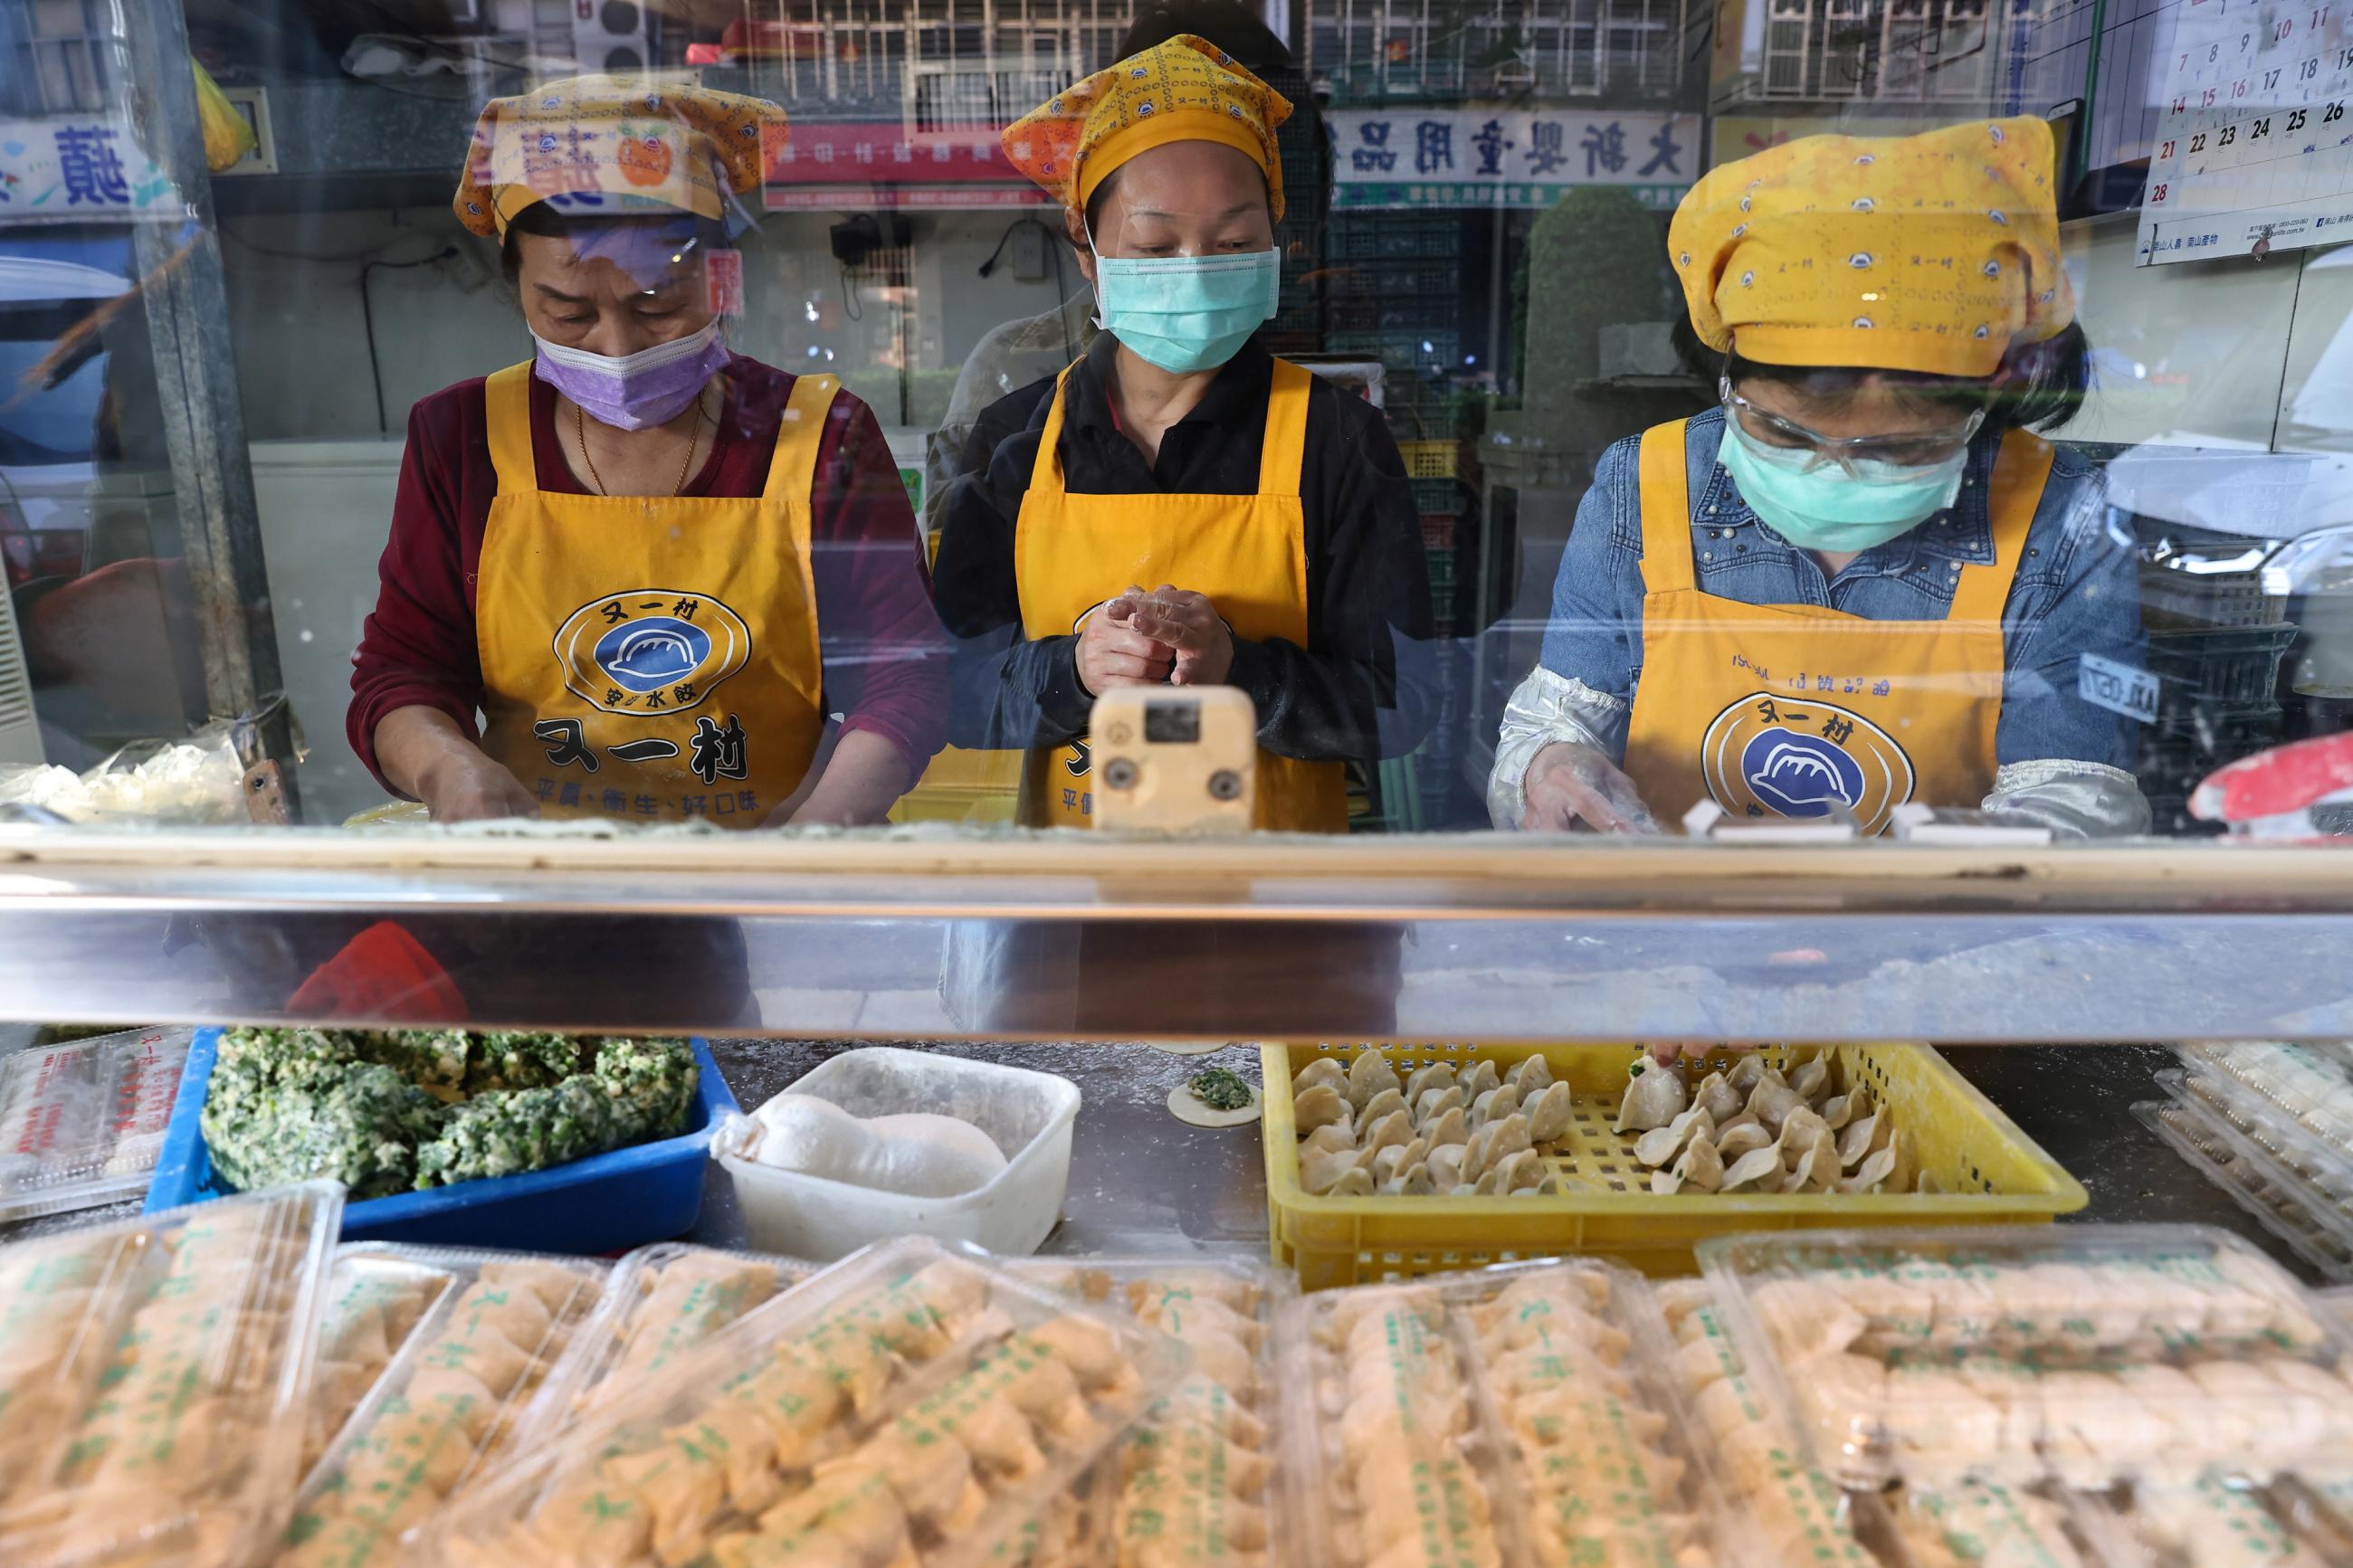 Three women in yellow aprons and COVID-19 masks make dumplings in a shop in Taiwan